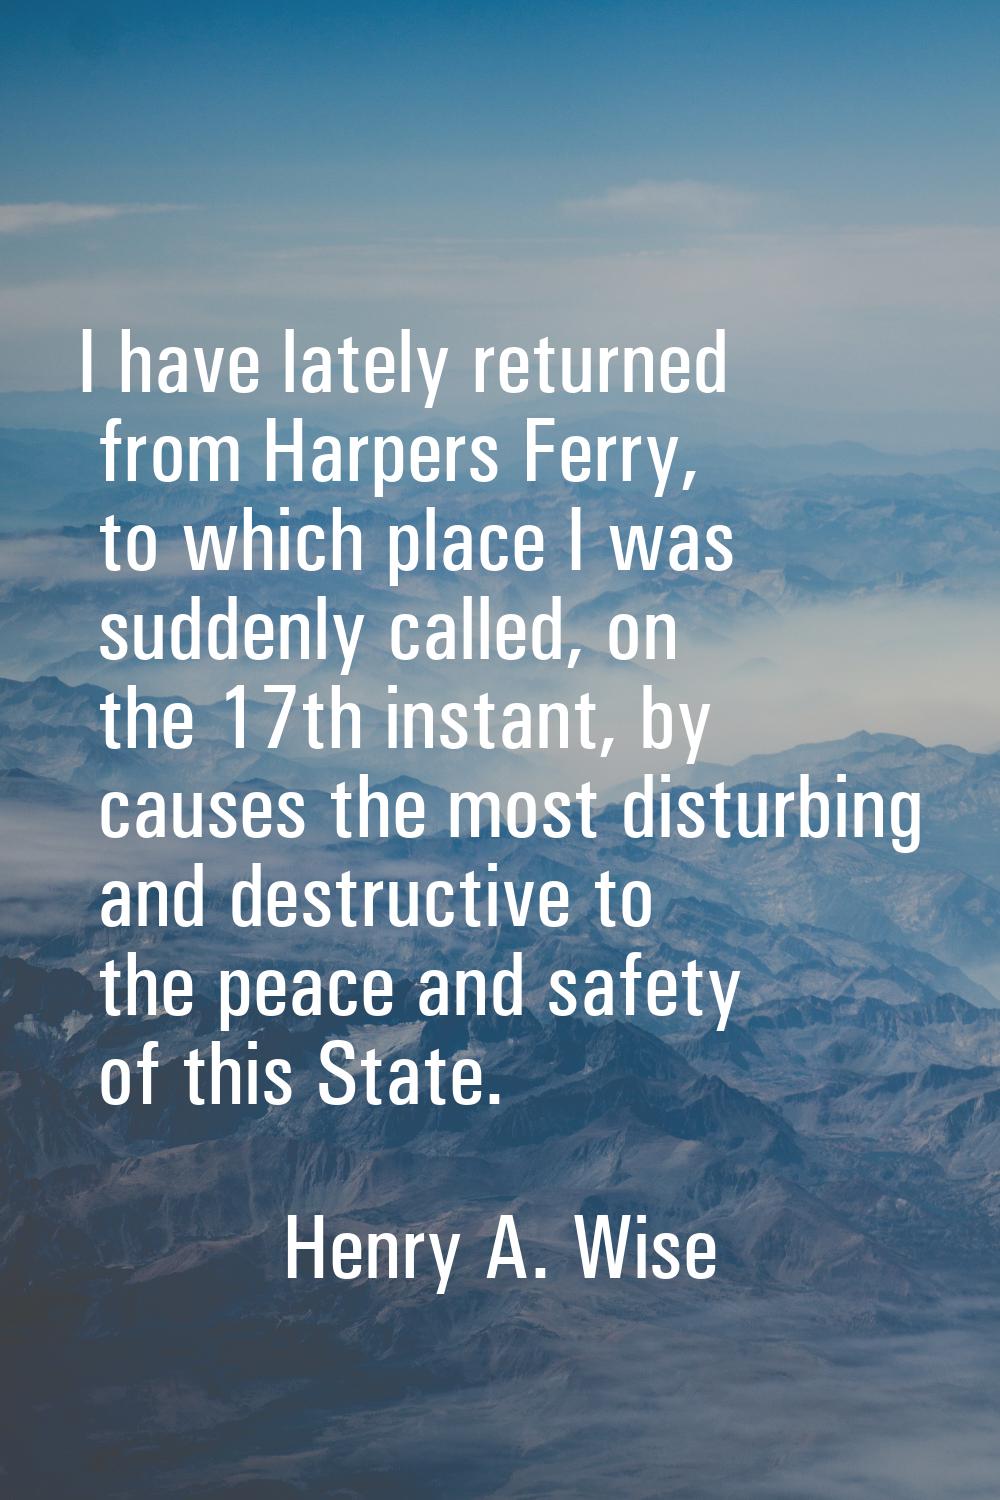 I have lately returned from Harpers Ferry, to which place I was suddenly called, on the 17th instan